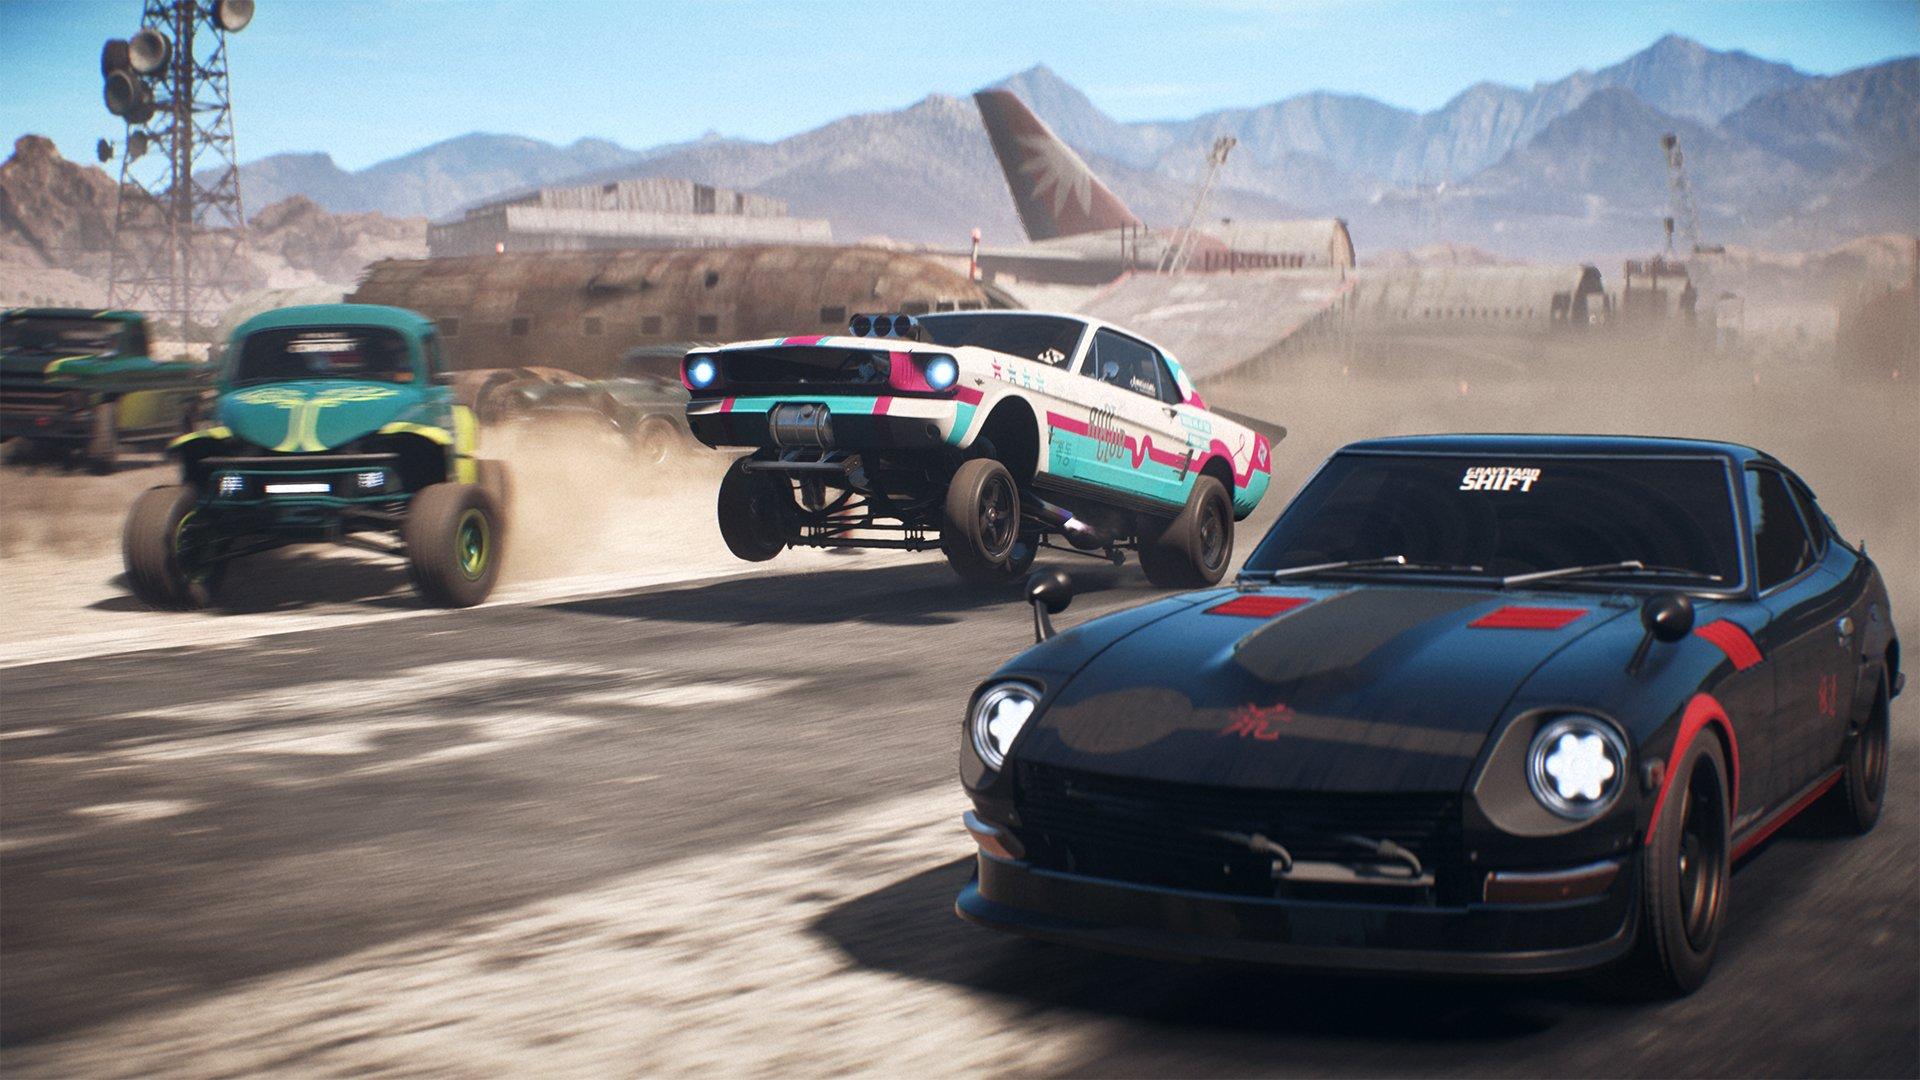 need for speed payback ps4 gamestop